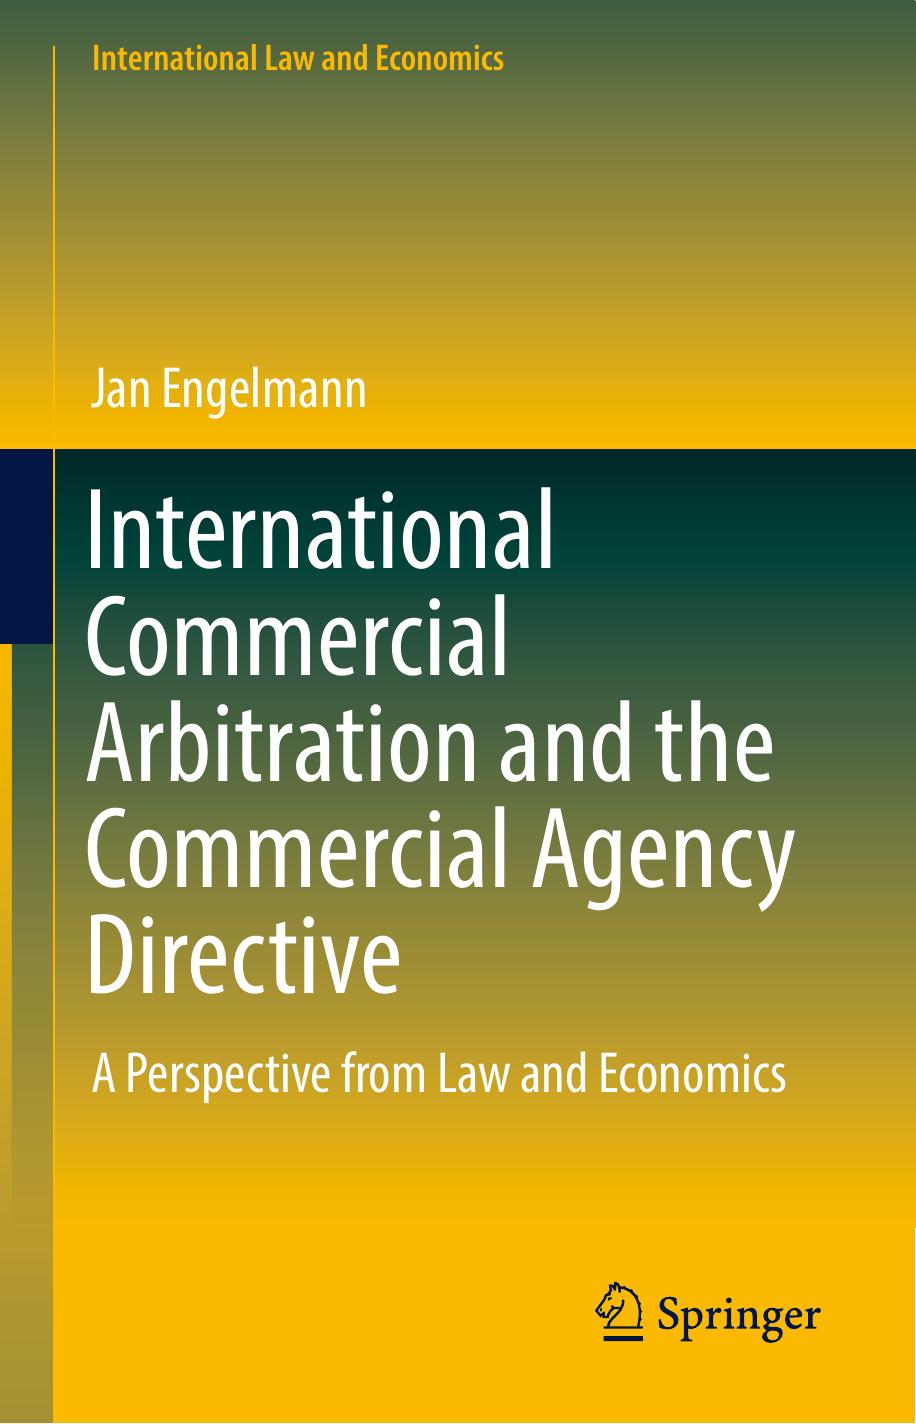 International Commercial Arbitration and the Commercial Agency Directive A Perspective from Law and Economics 2017